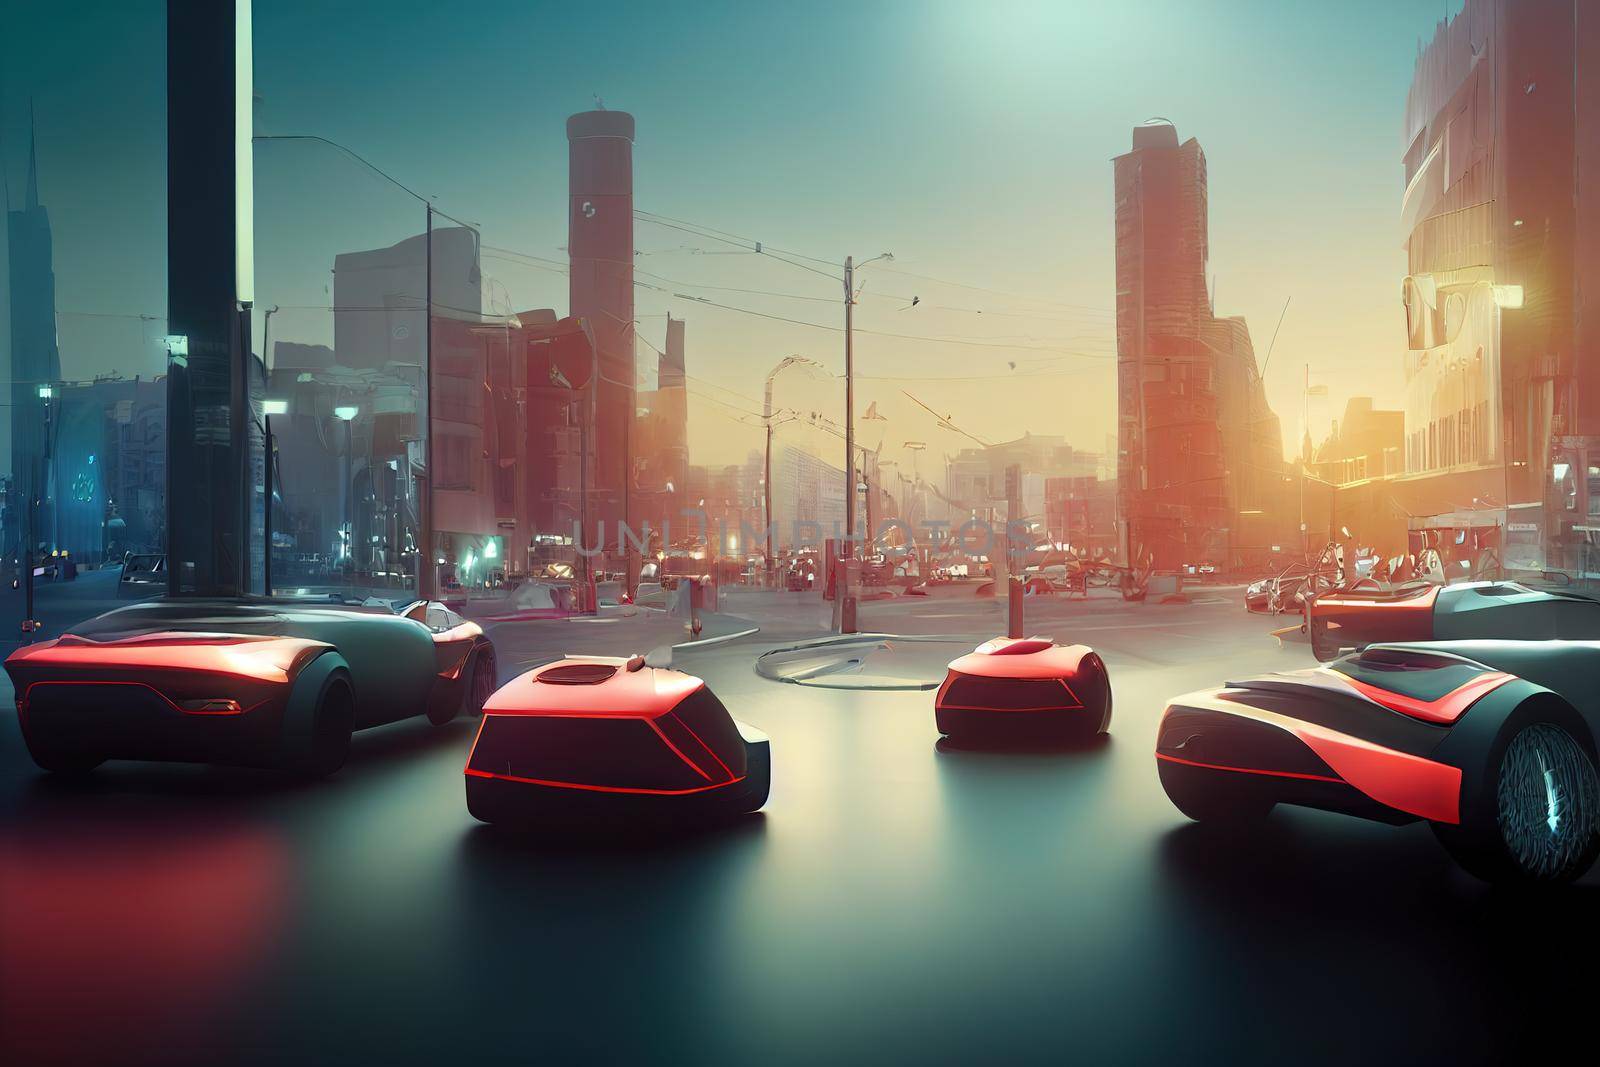 red futuristic delivery cars in future city. High quality 3d illustration